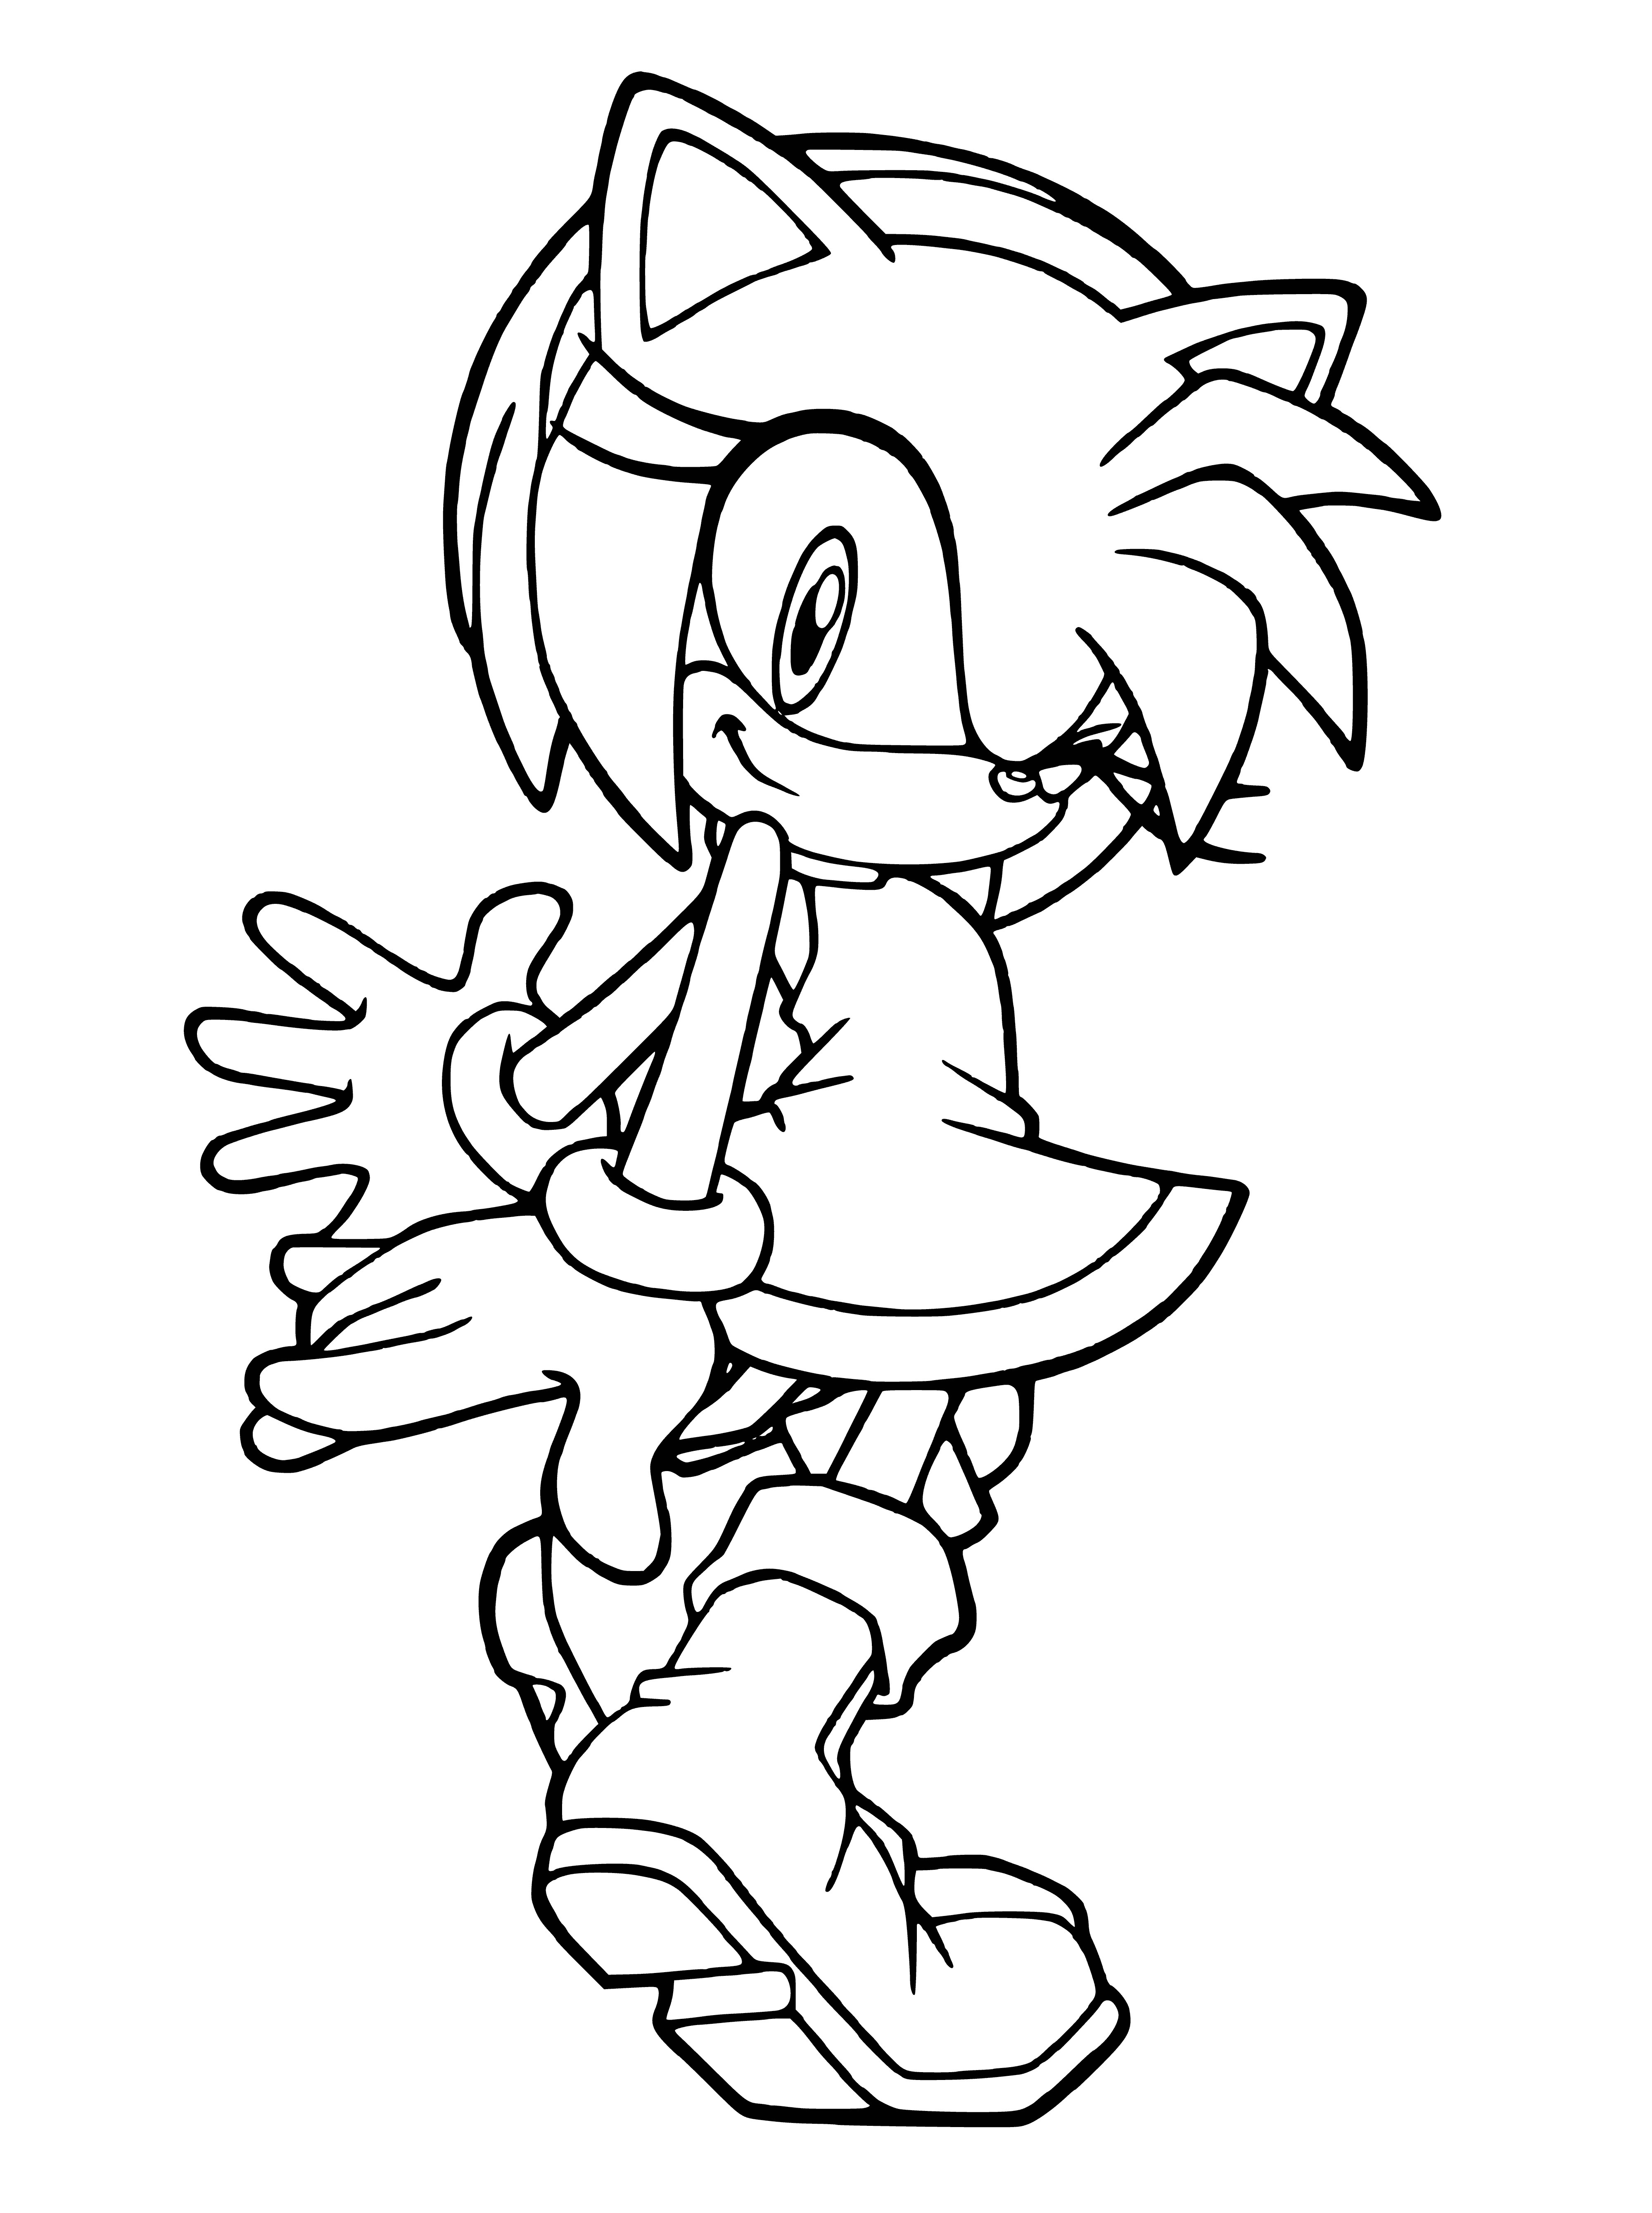 coloring page: Amy is a pink hedgehog in a red dress & white gloves w/ a red backpack & long quills. Green eyes.